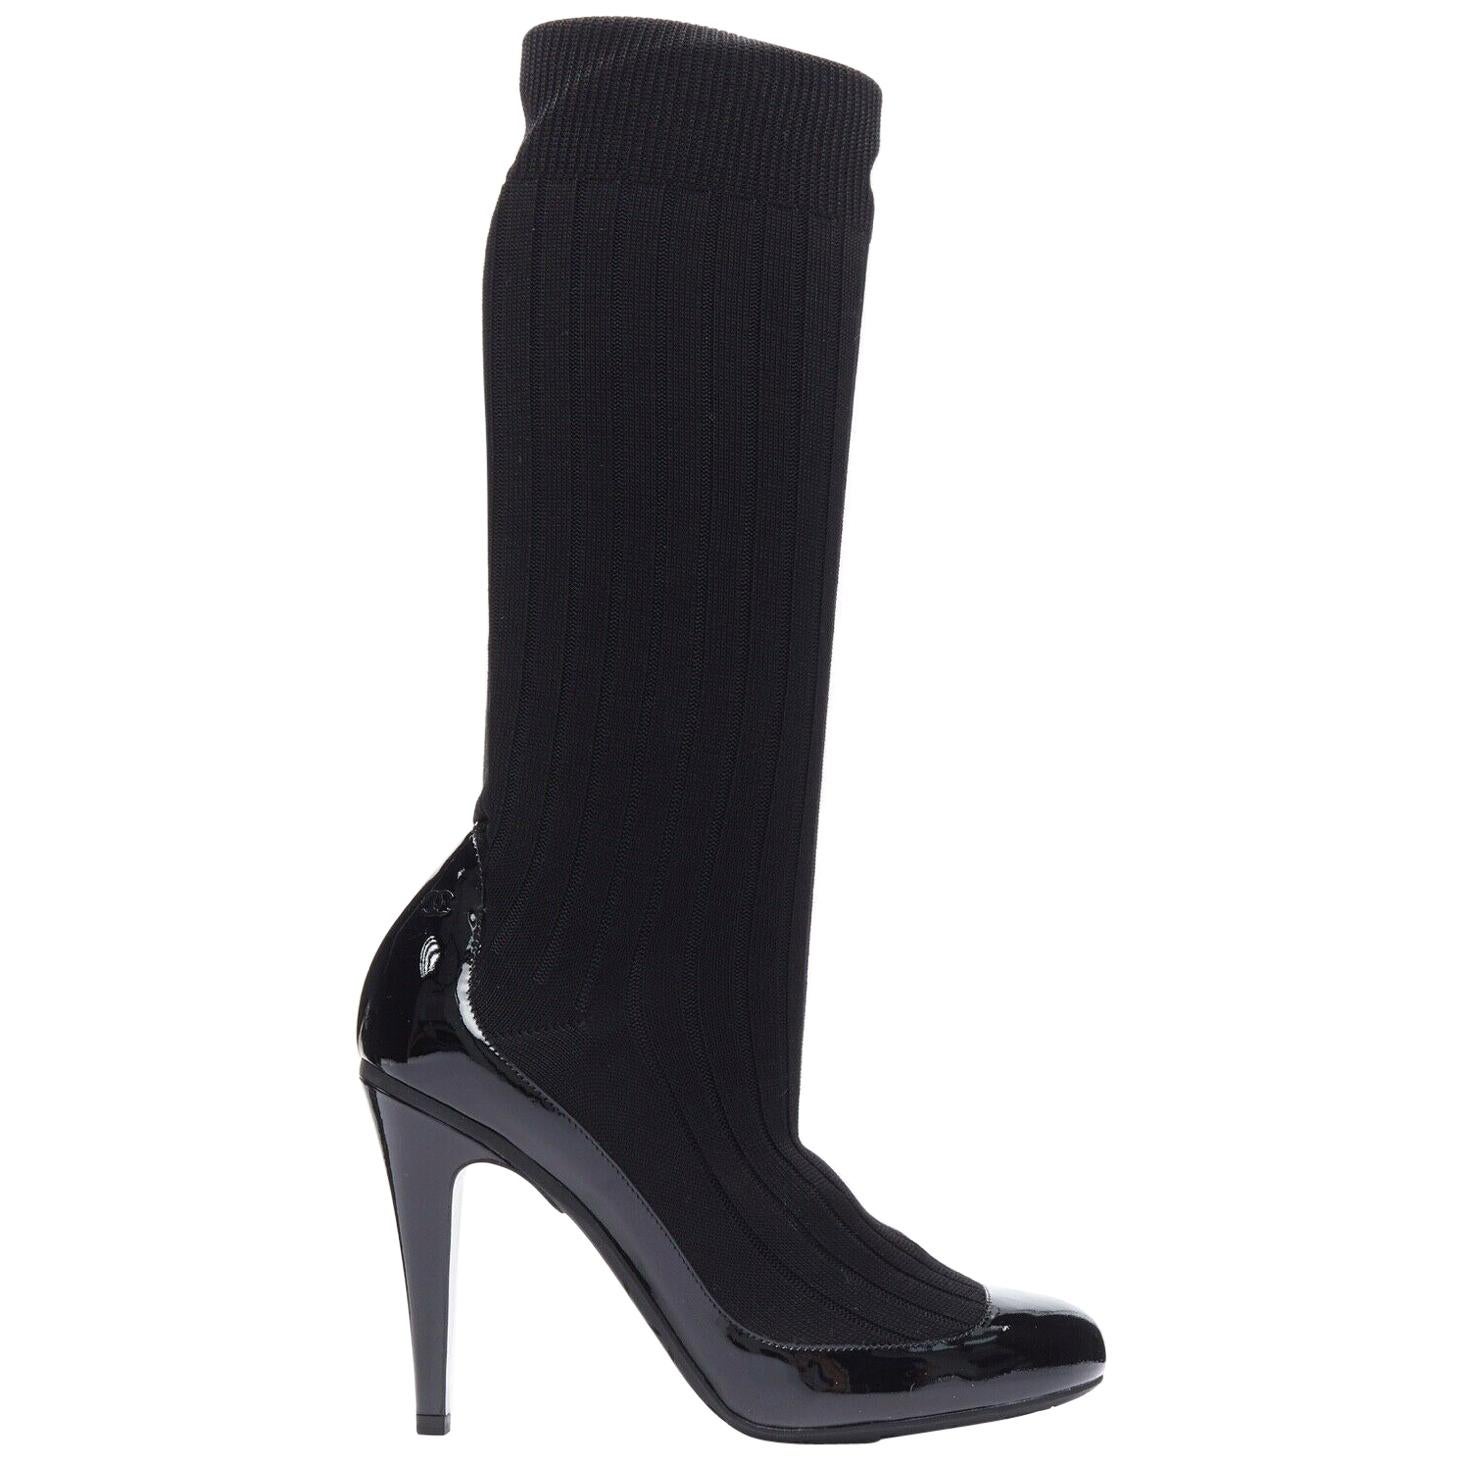 runway CHANEL black patent leather sock knit stretch heeled boots EU 39.5